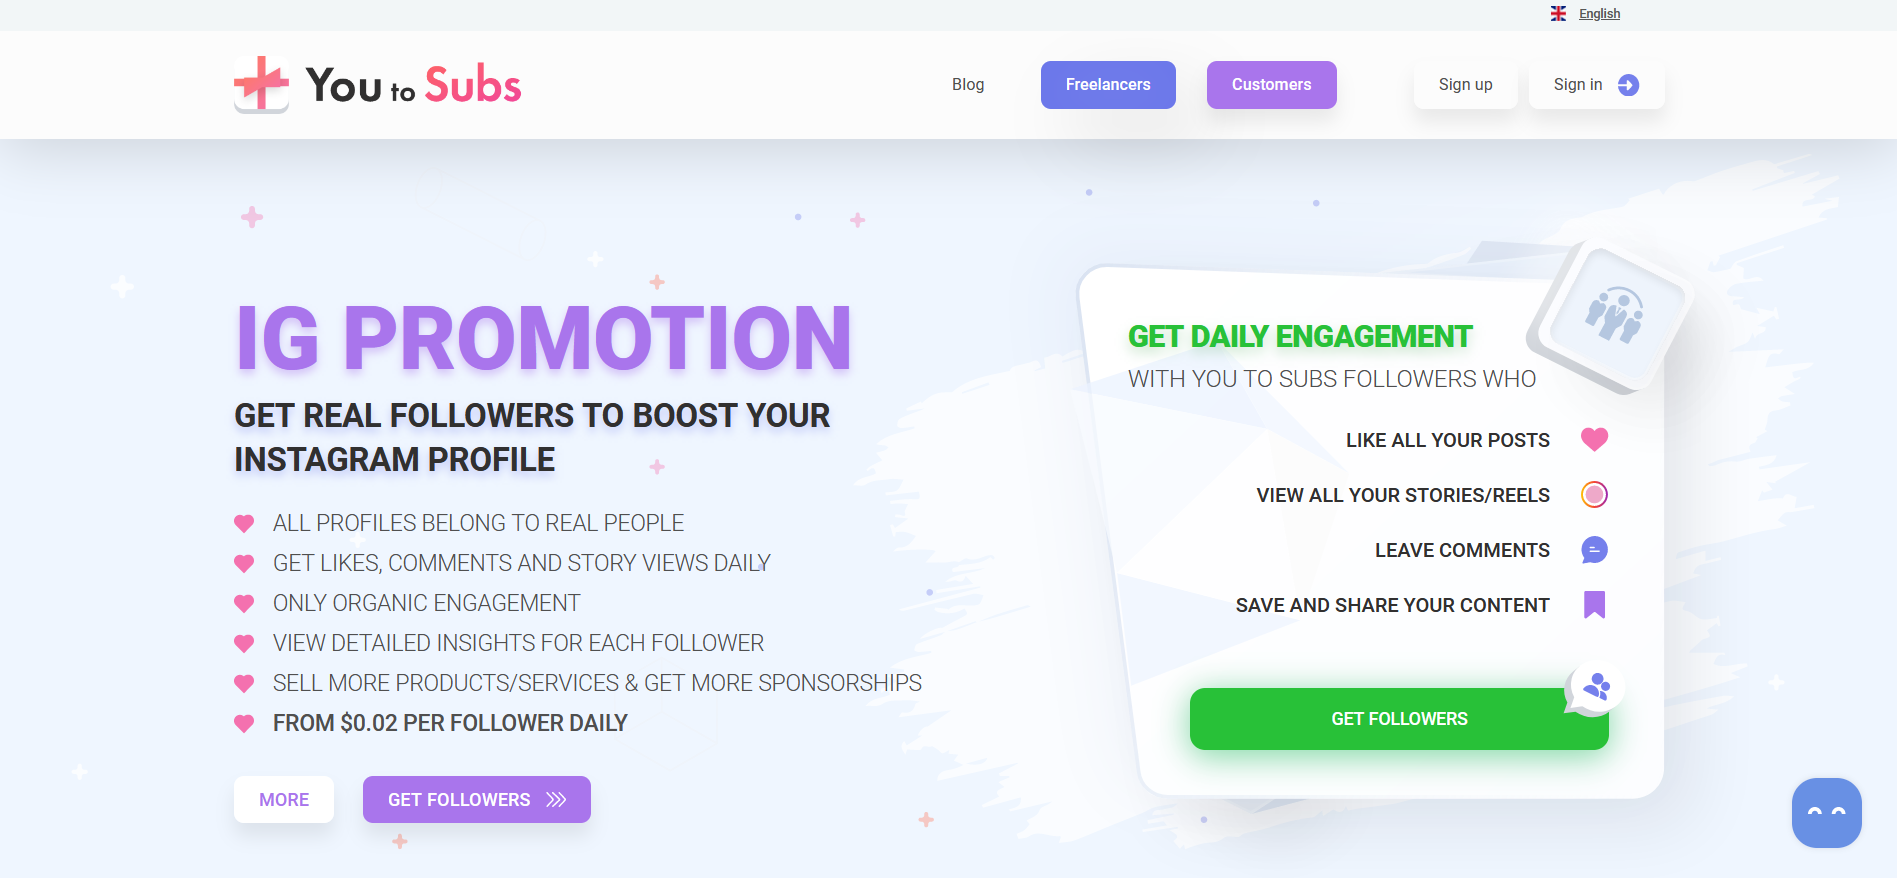 You to Subs Landing page